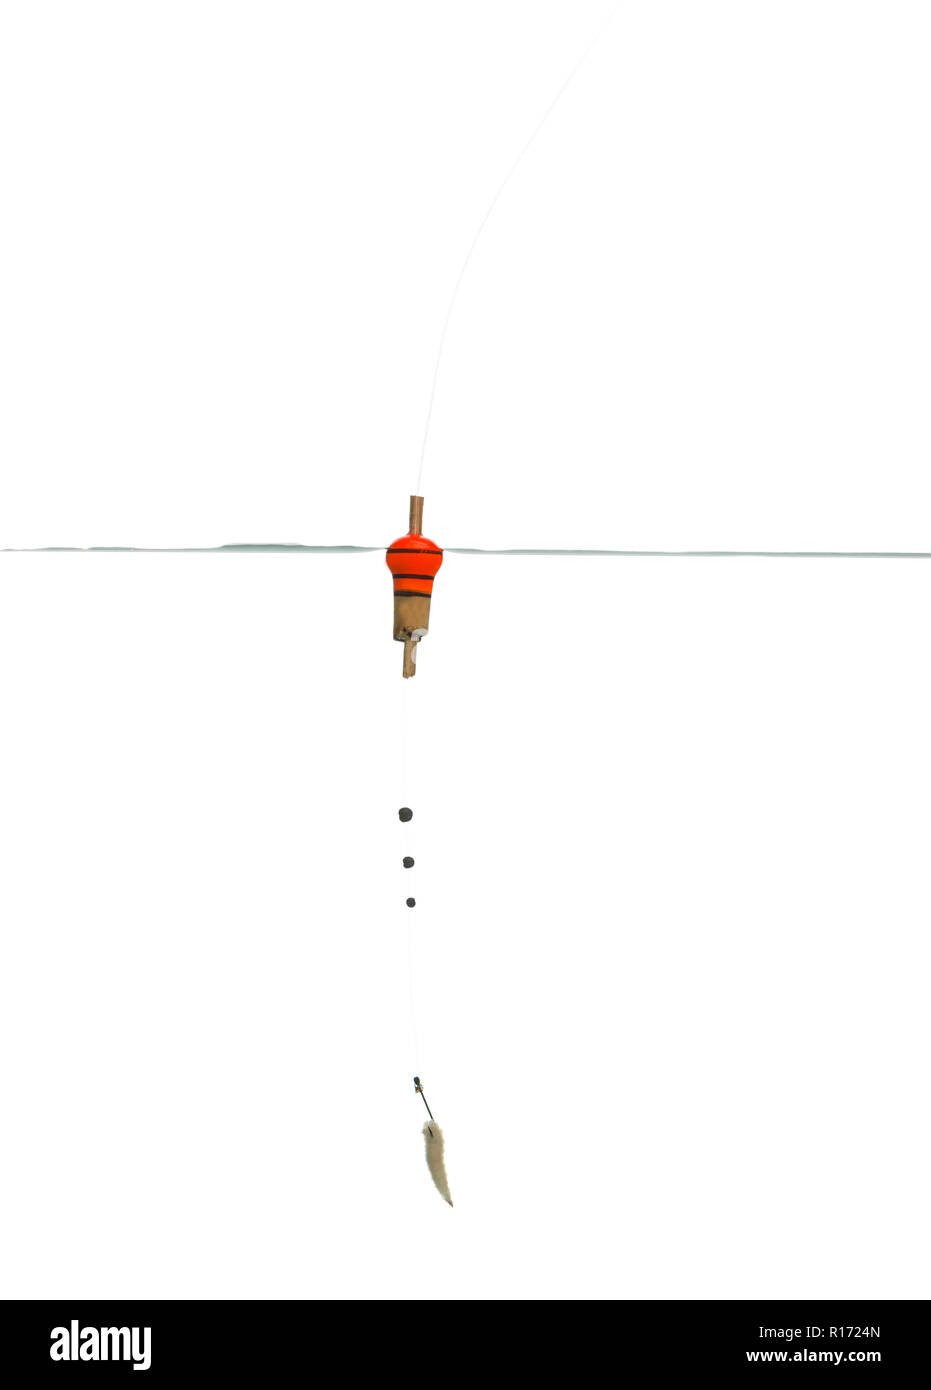 Float, fishing line and bait on hook underwater, isolated on white